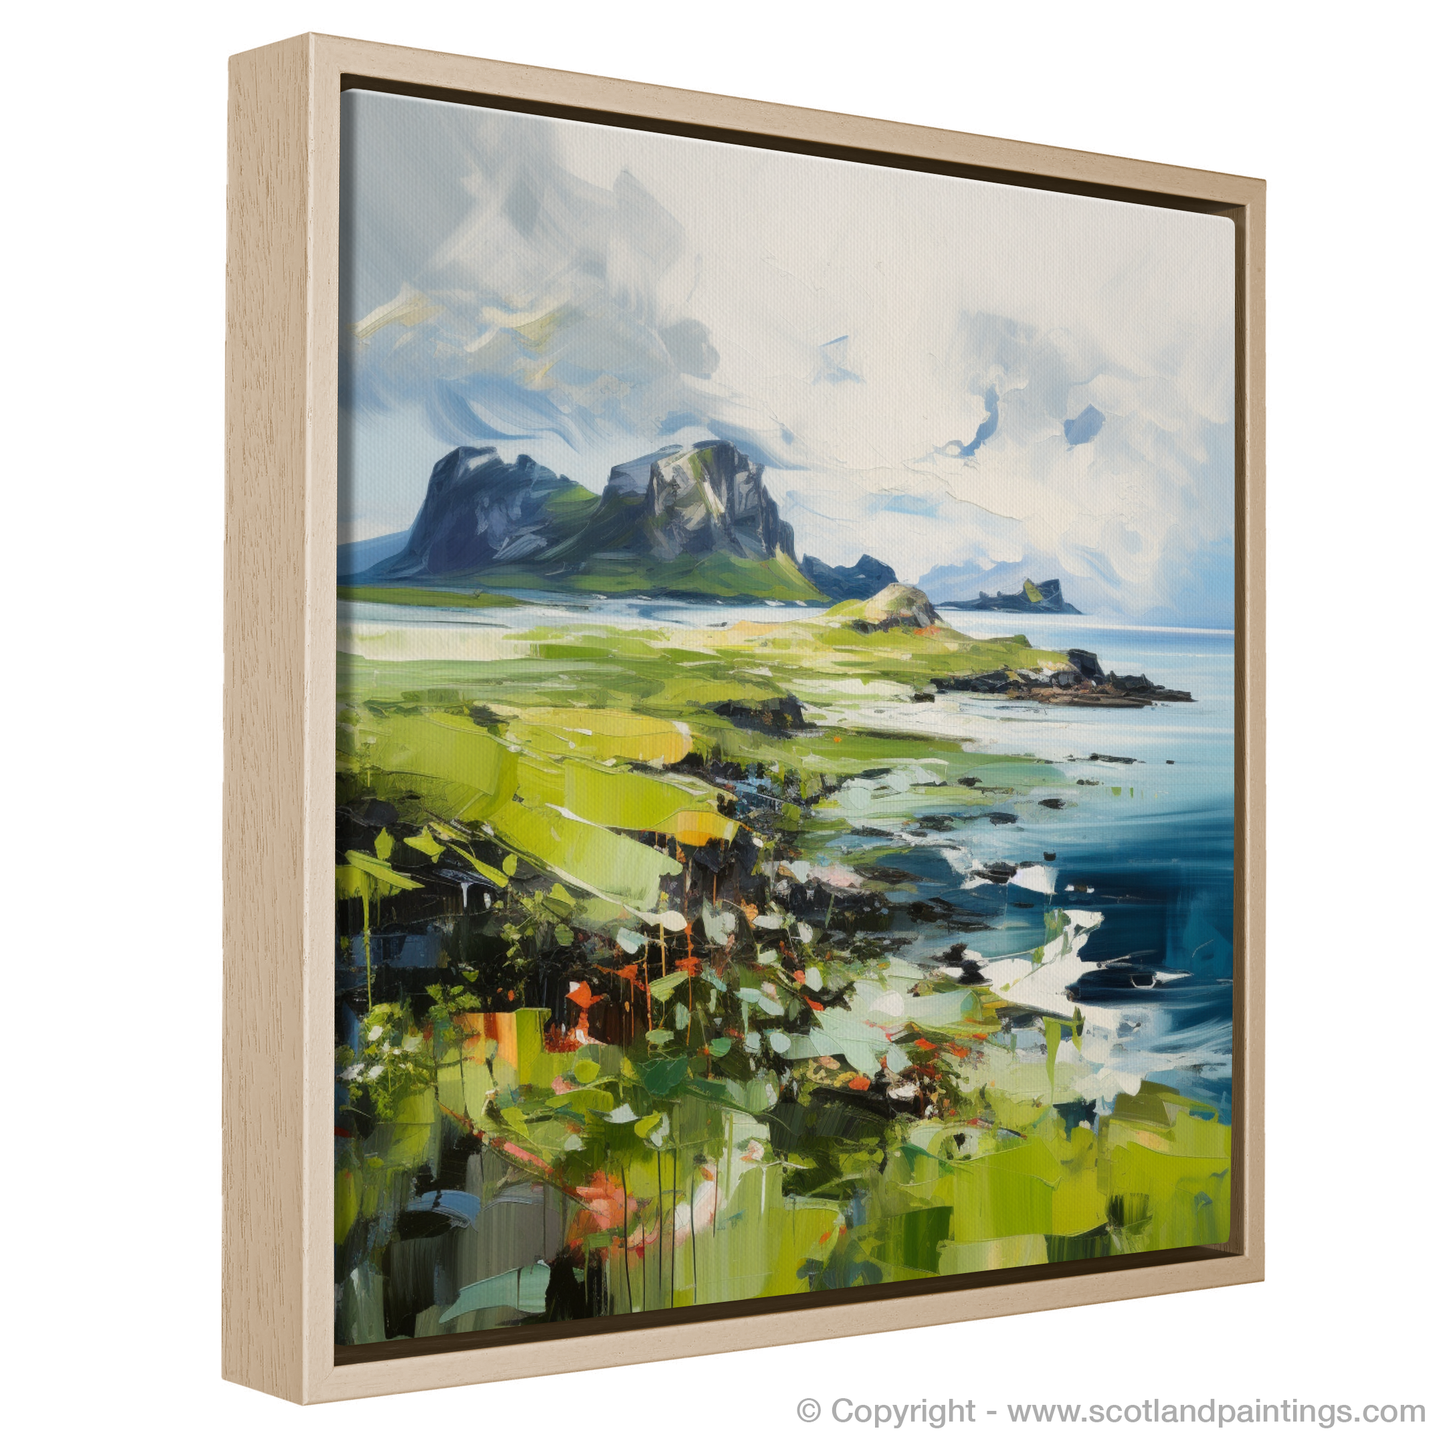 Painting and Art Print of Isle of Eigg, Inner Hebrides entitled "Isle of Eigg Unleashed: An Expressionist Ode to Scotland's Wild Beauty".